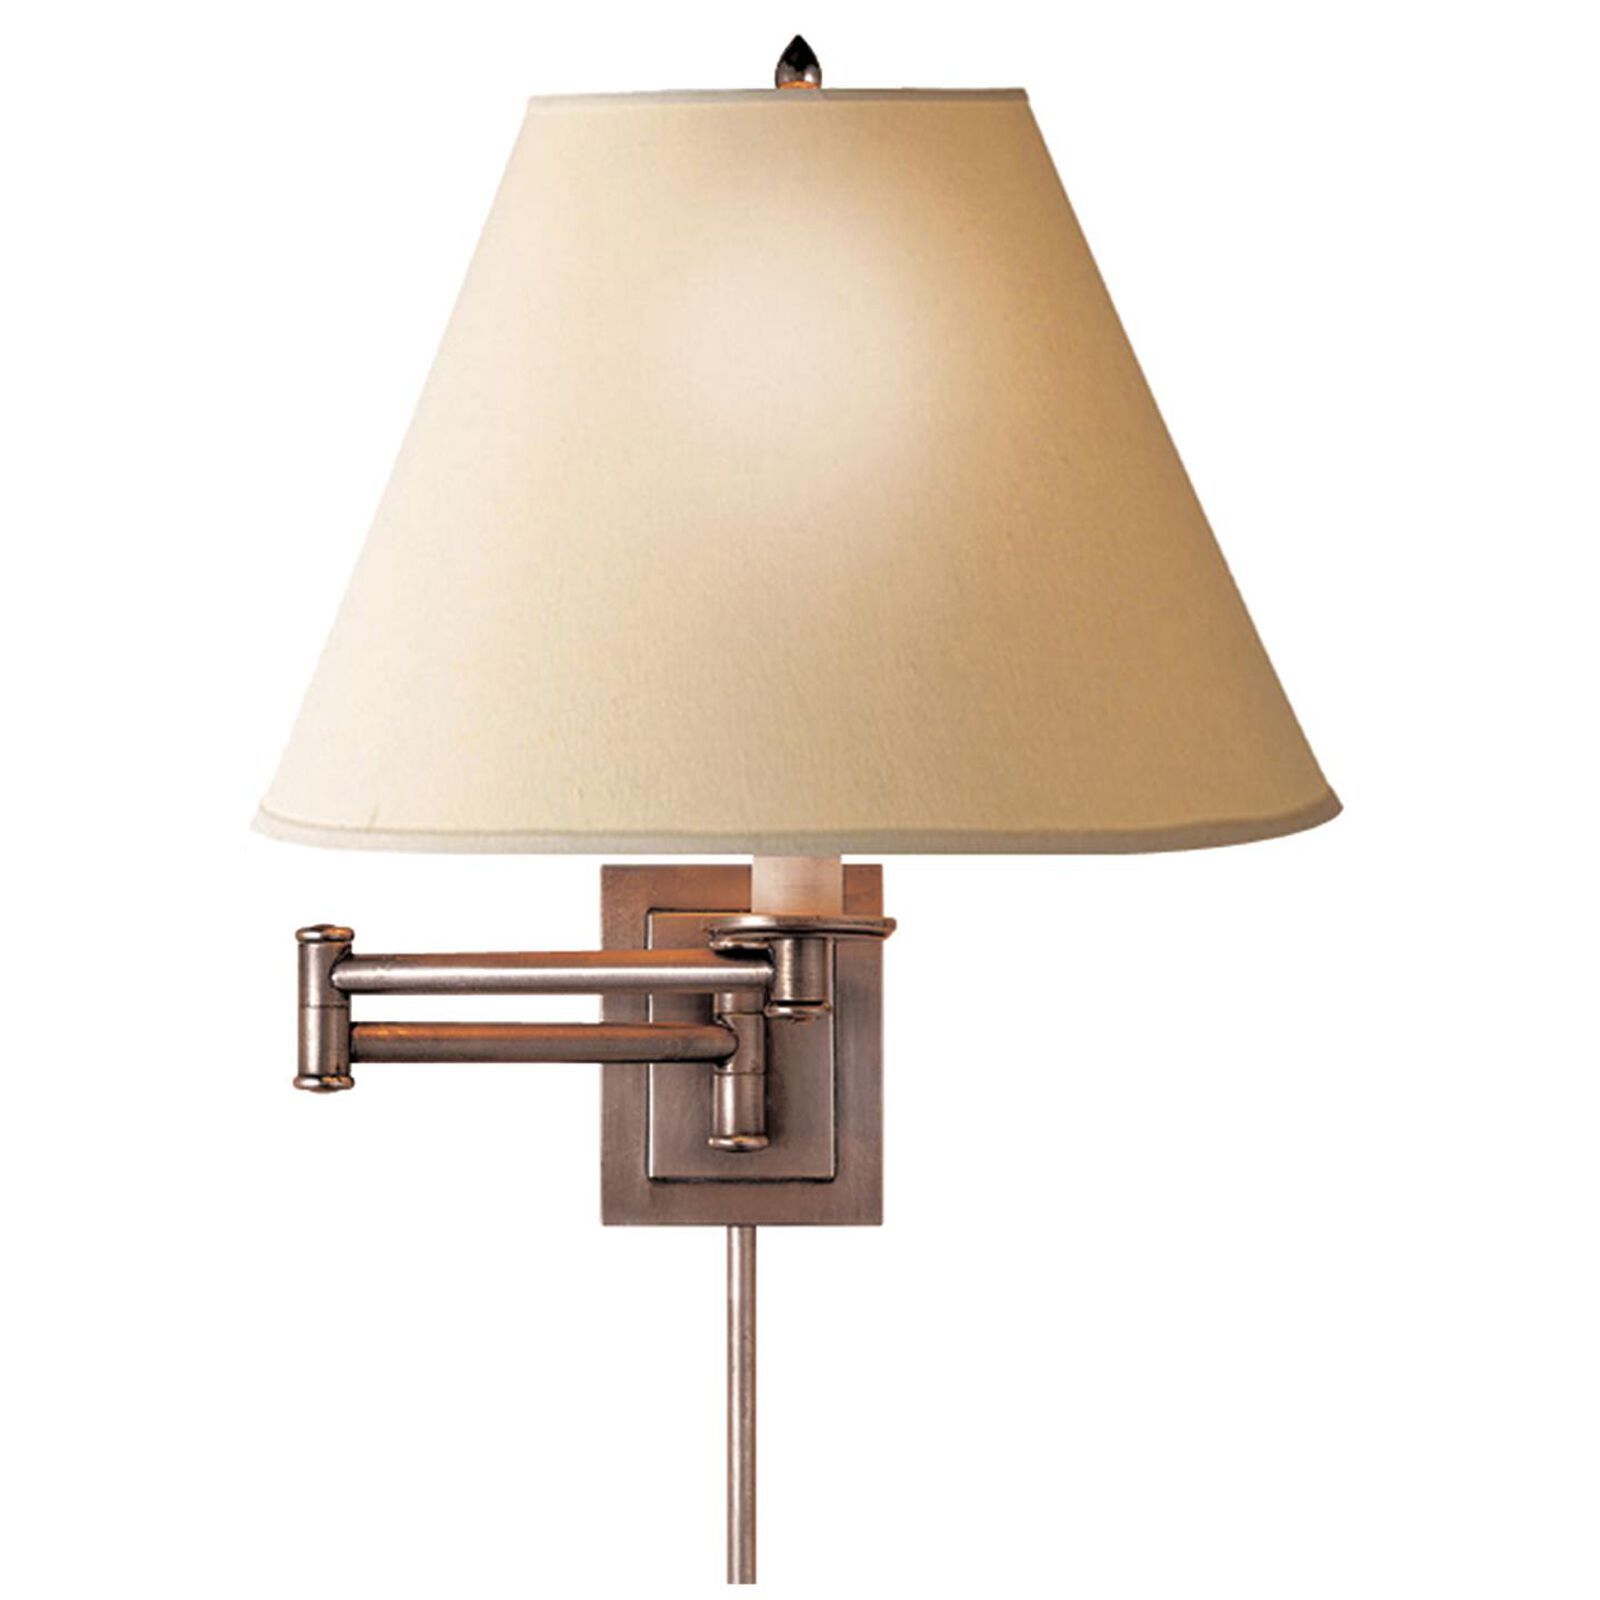 Studio Vc Primitive Swing Arm Wall Swing Lamp by Visual Comfort and Co. | Capitol Lighting 1800lighting.com